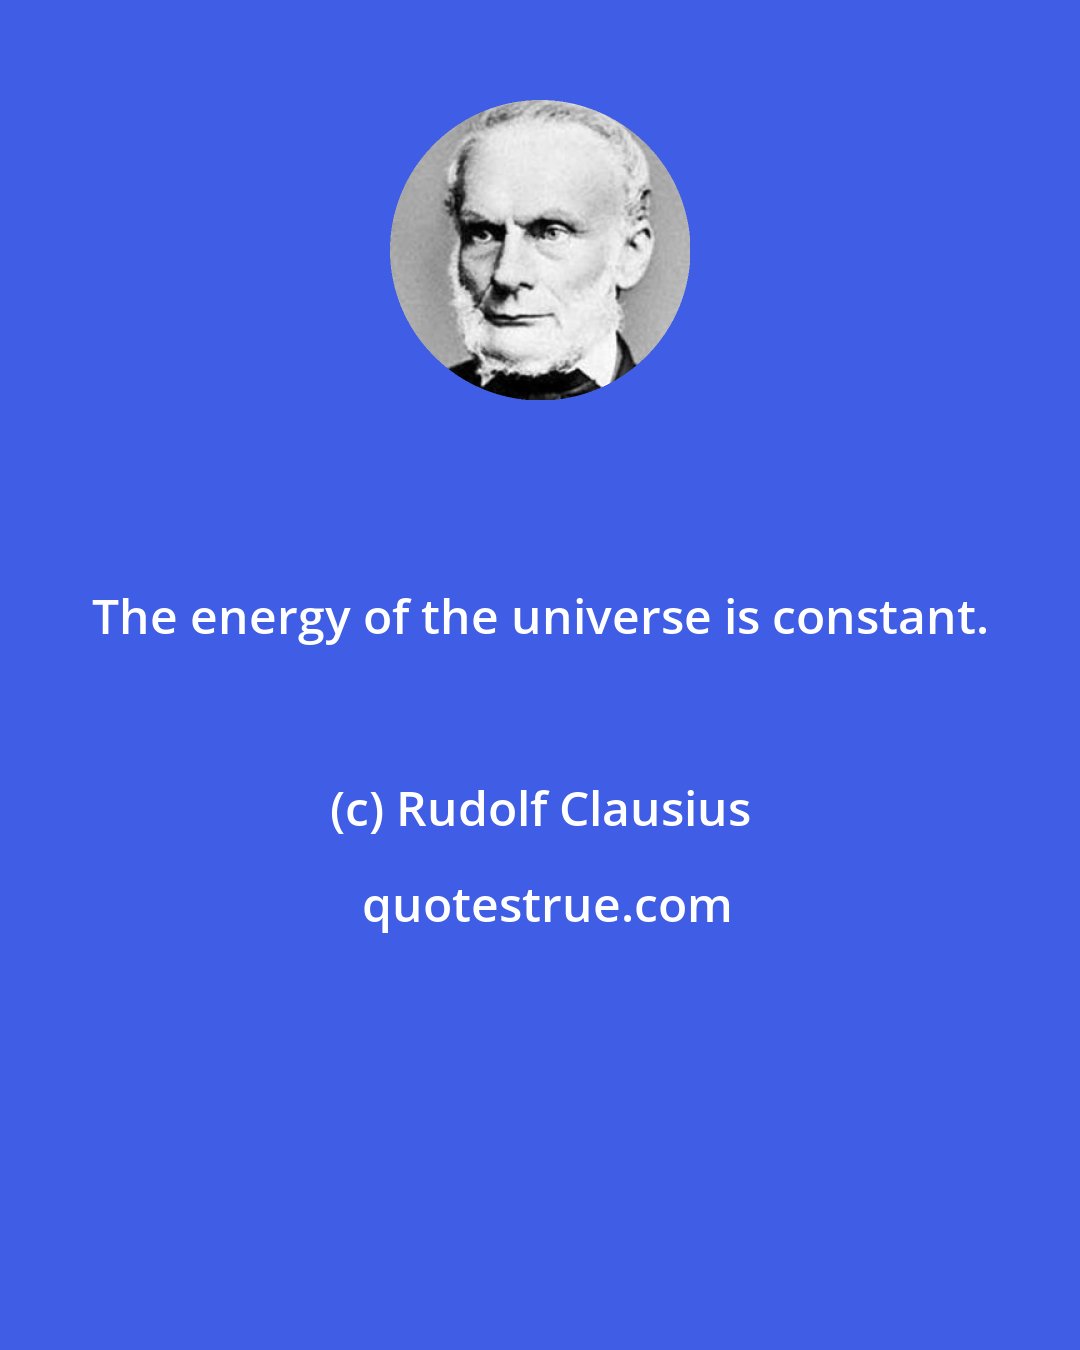 Rudolf Clausius: The energy of the universe is constant.